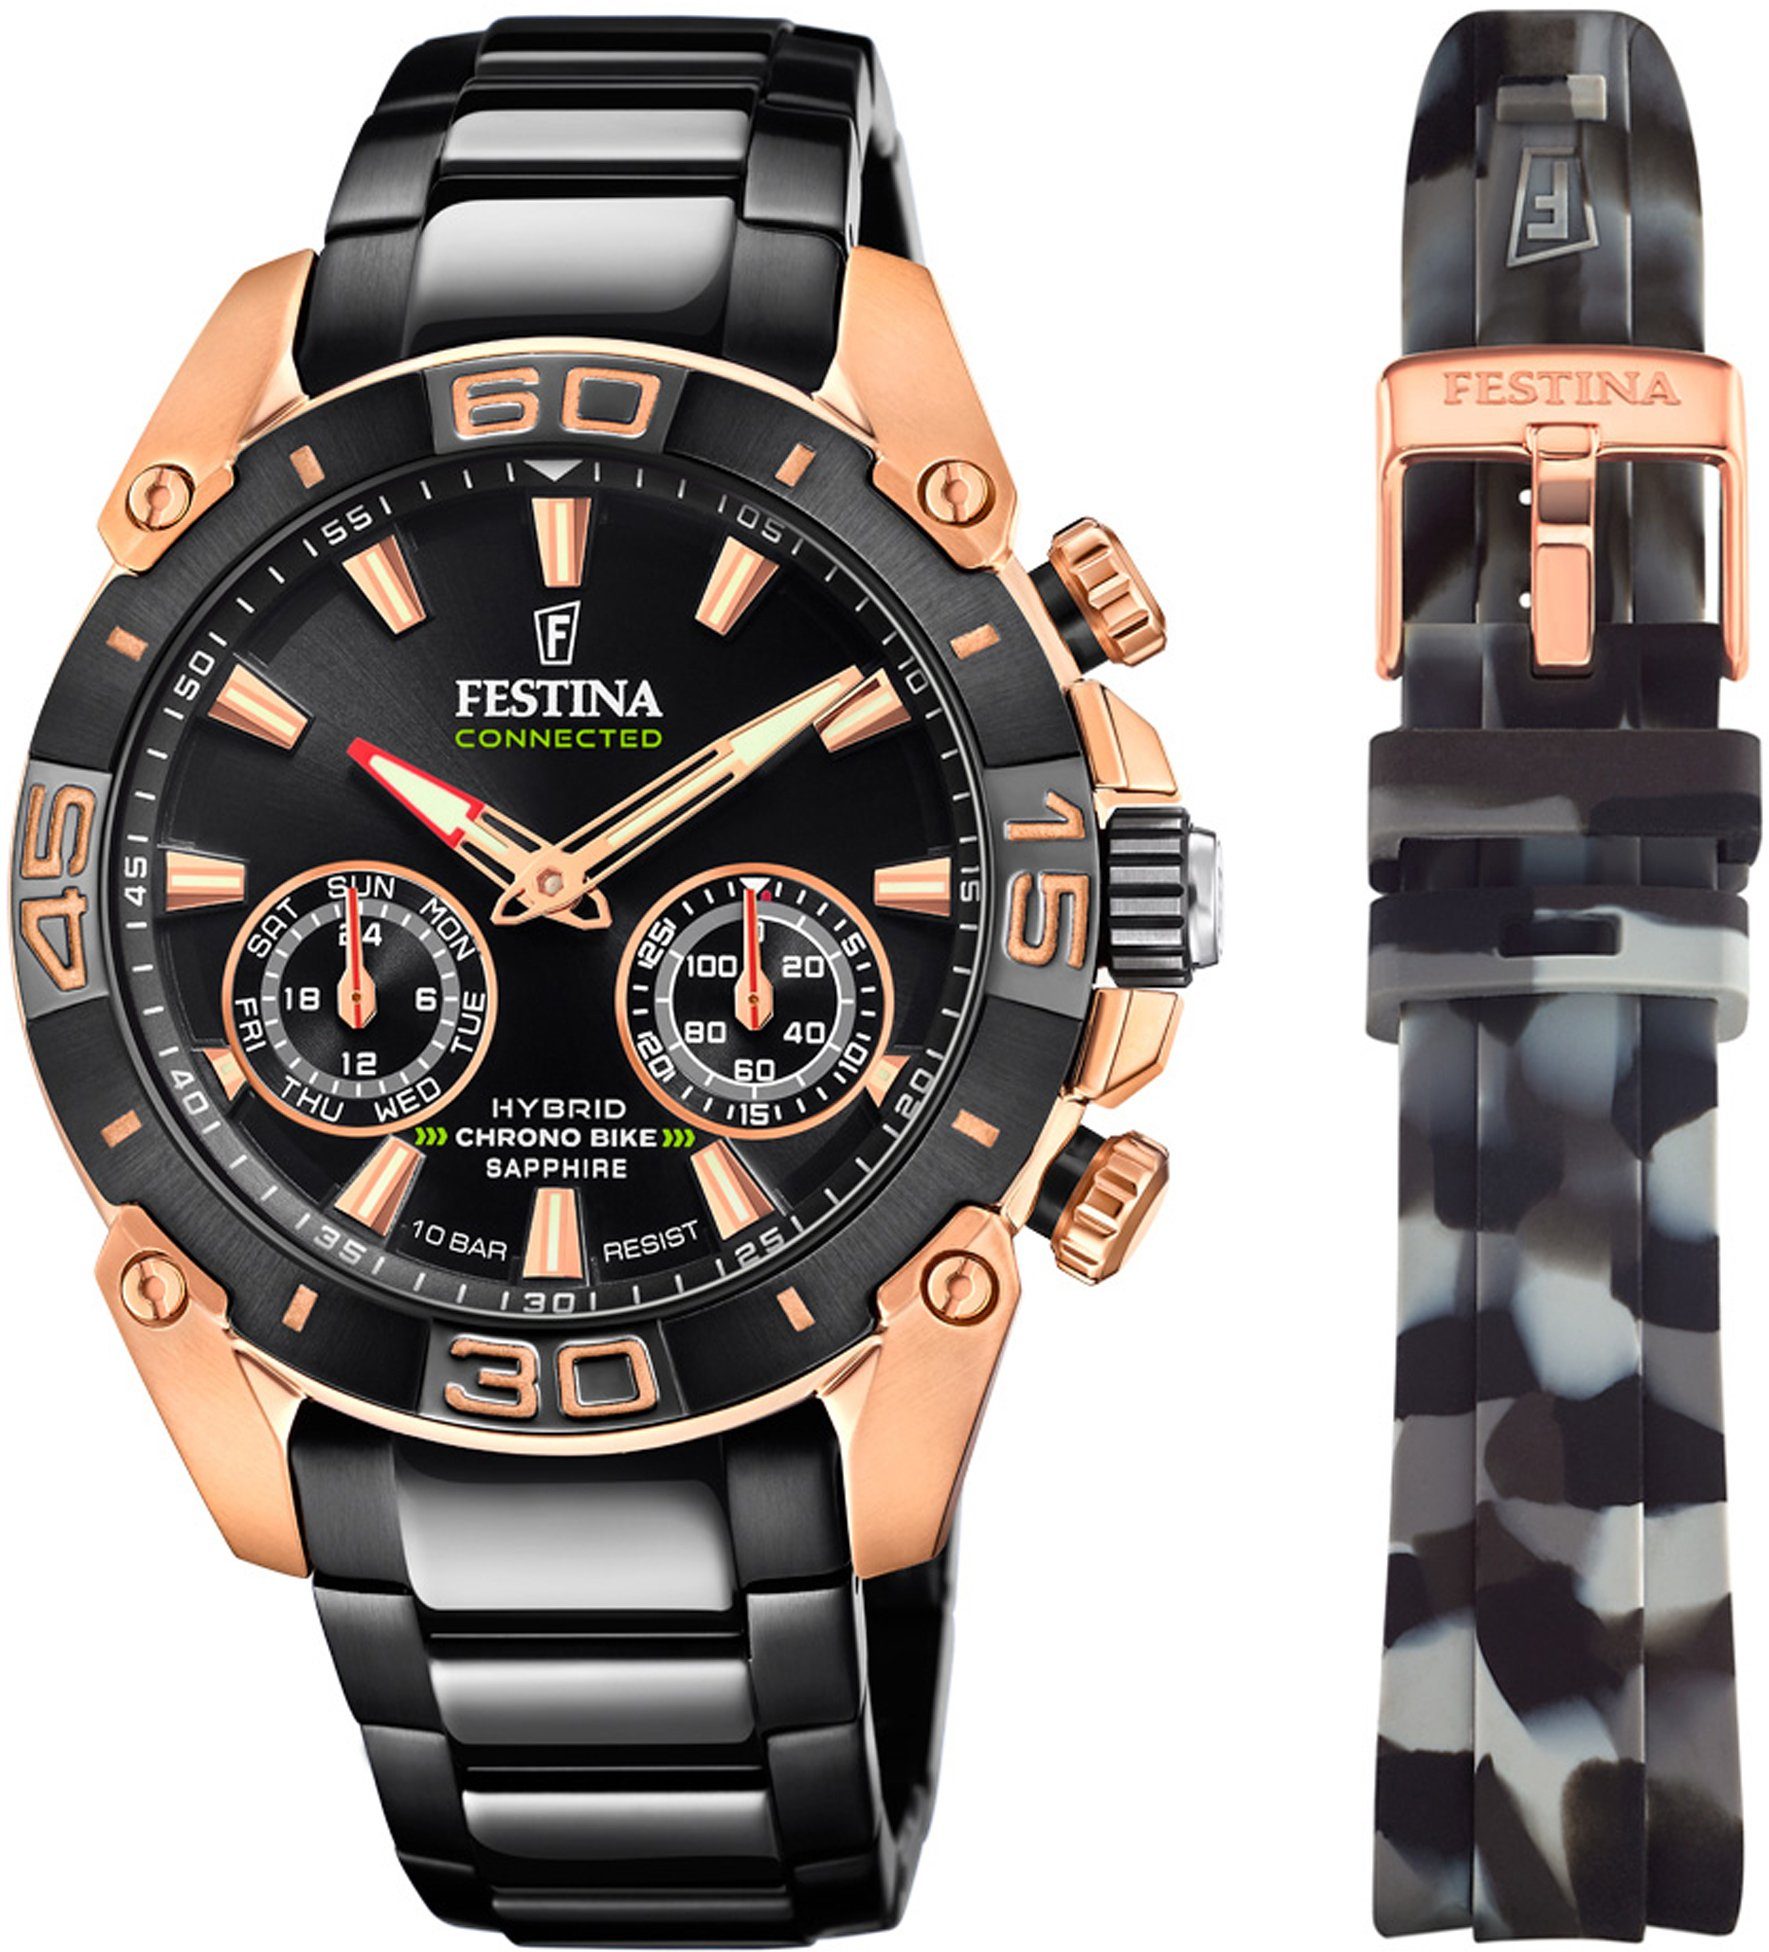 Festina Chronograph Geschenk (Set, mit Wechselband), 2-tlg., auch Edition Bike Special als Chrono ideal 2021 - F20548/1, Connected